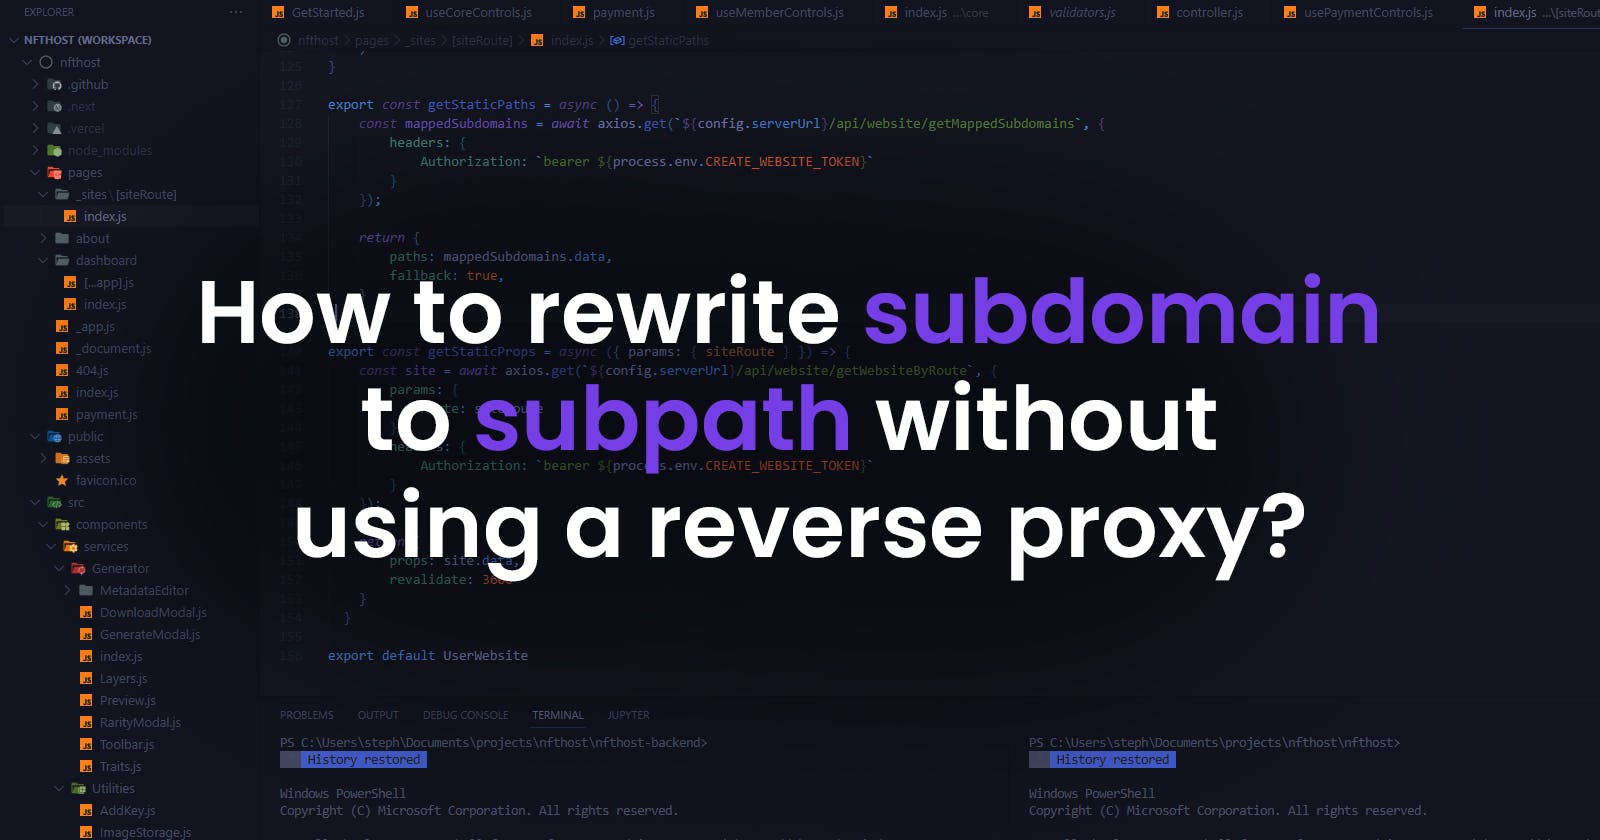 How to rewrite subdomain to subpath without using a reverse proxy?